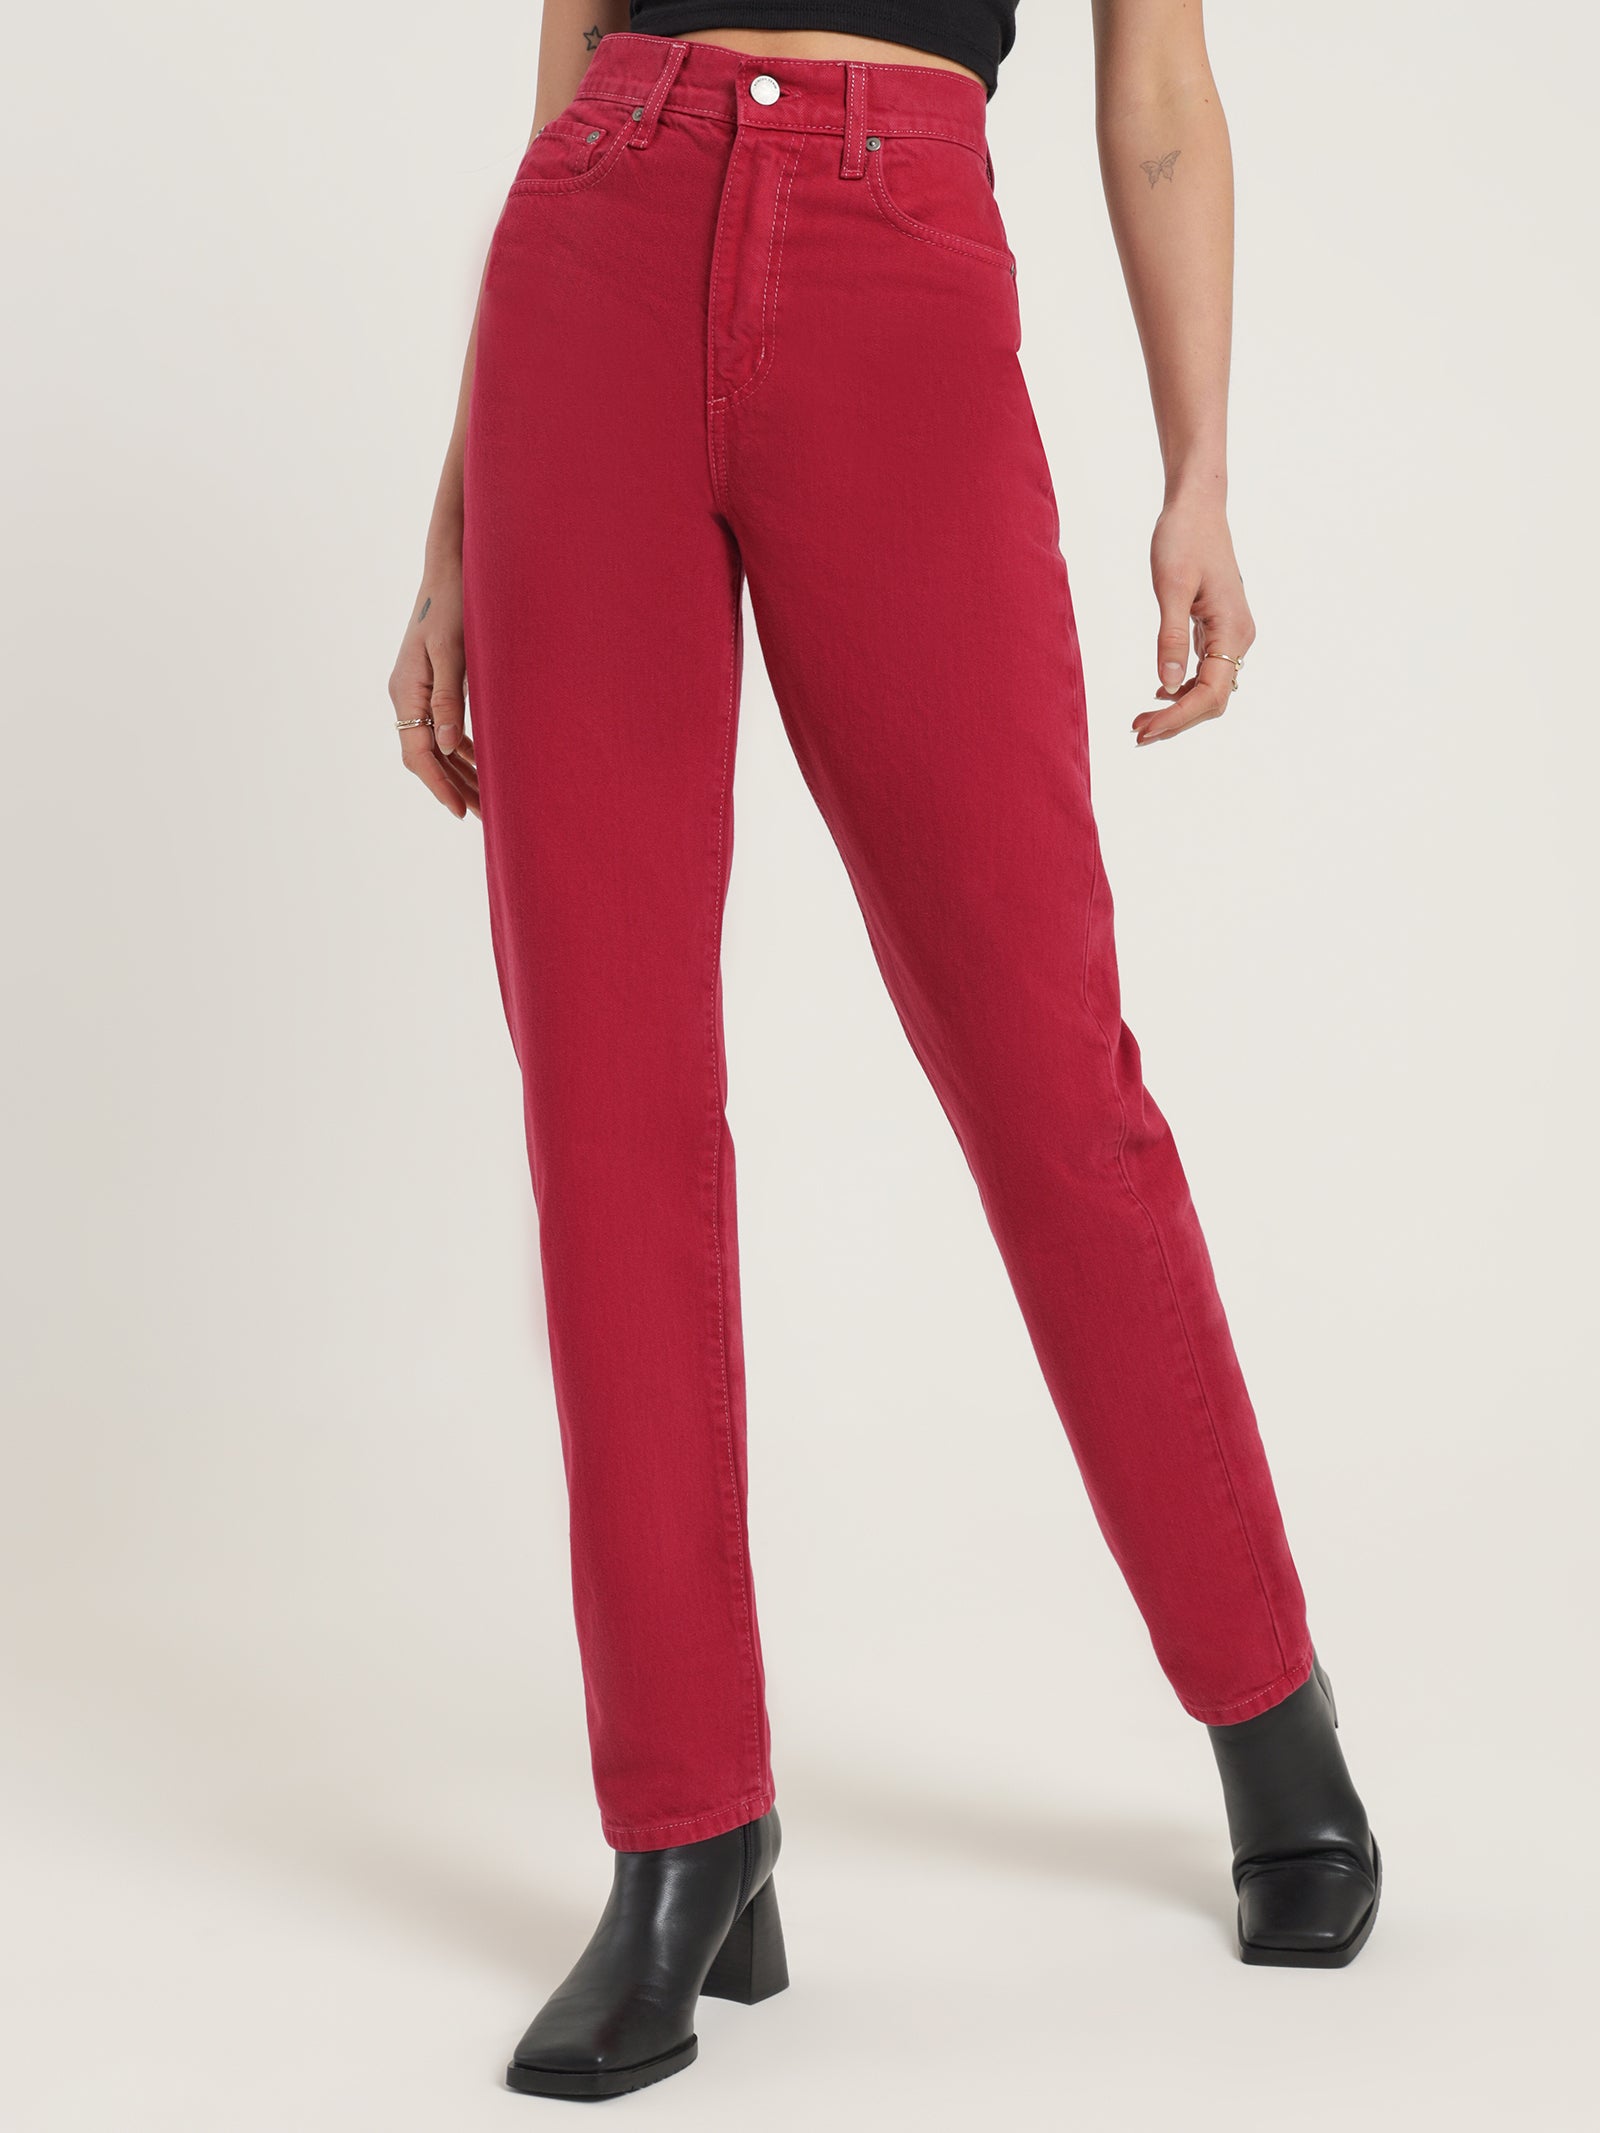 Andi Jeans in Cherry Red